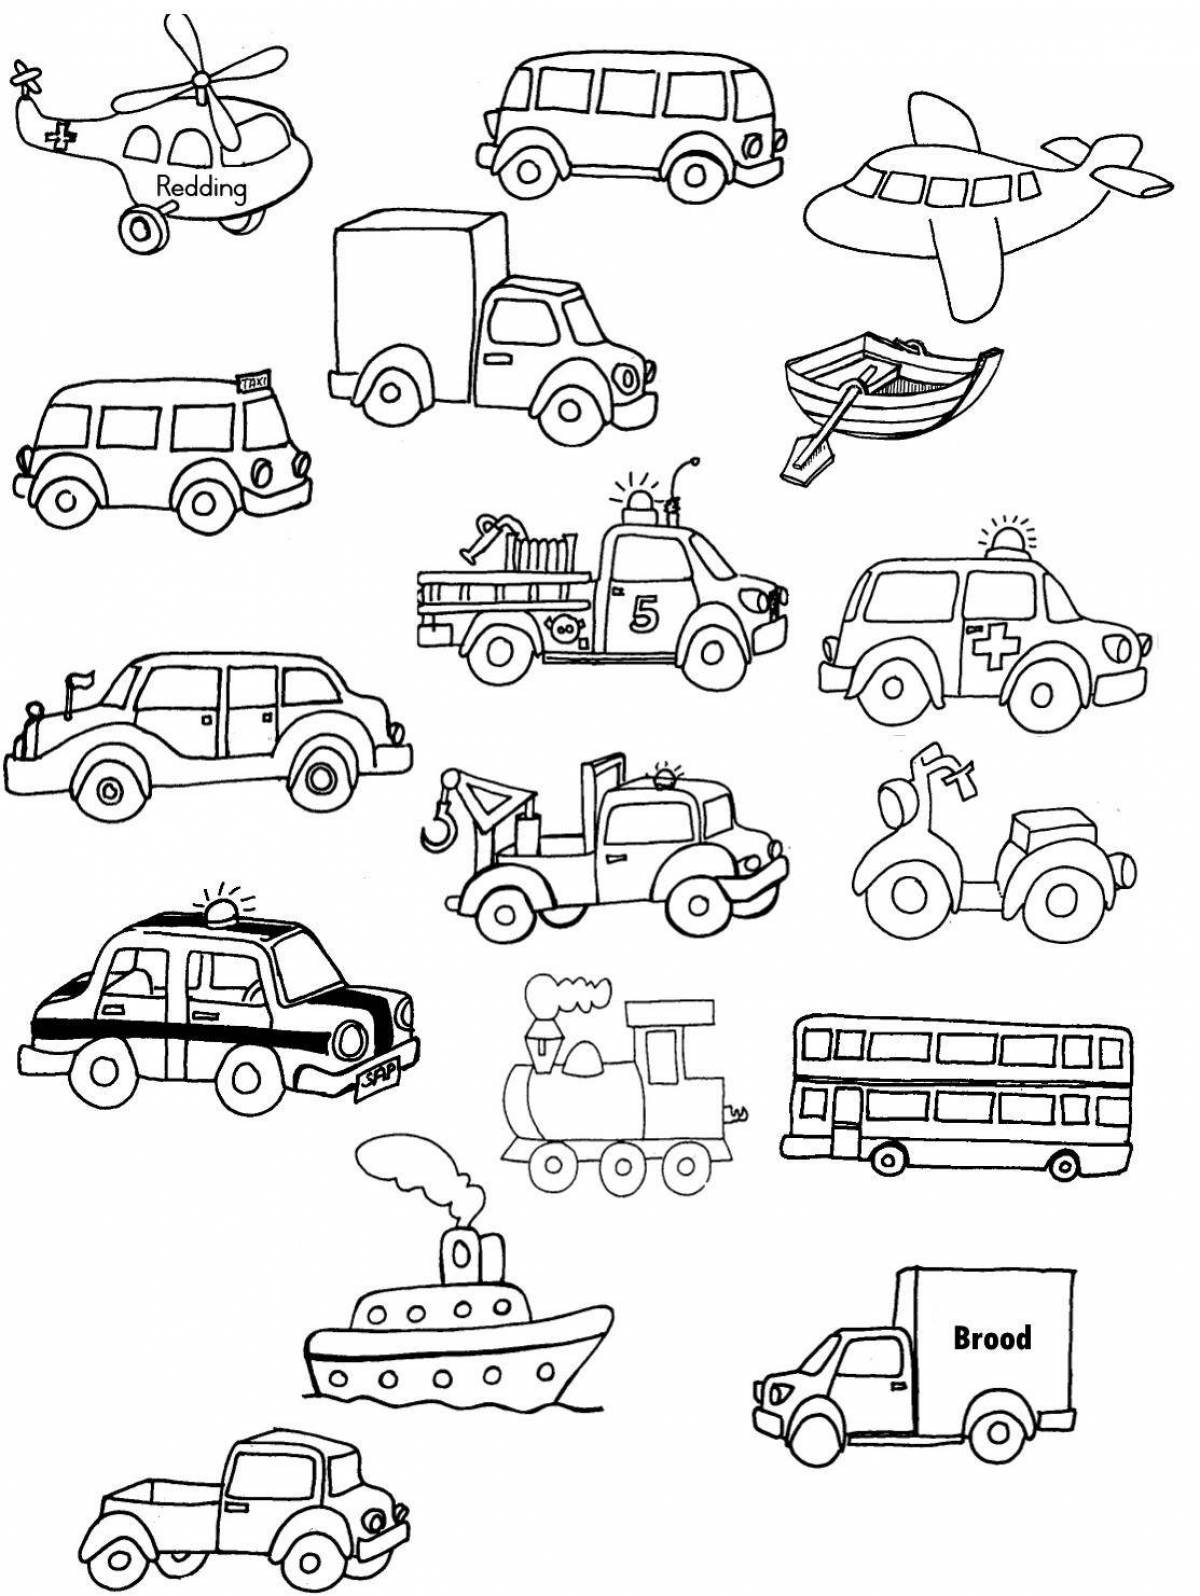 Magic special transport coloring book for 6-7 year olds